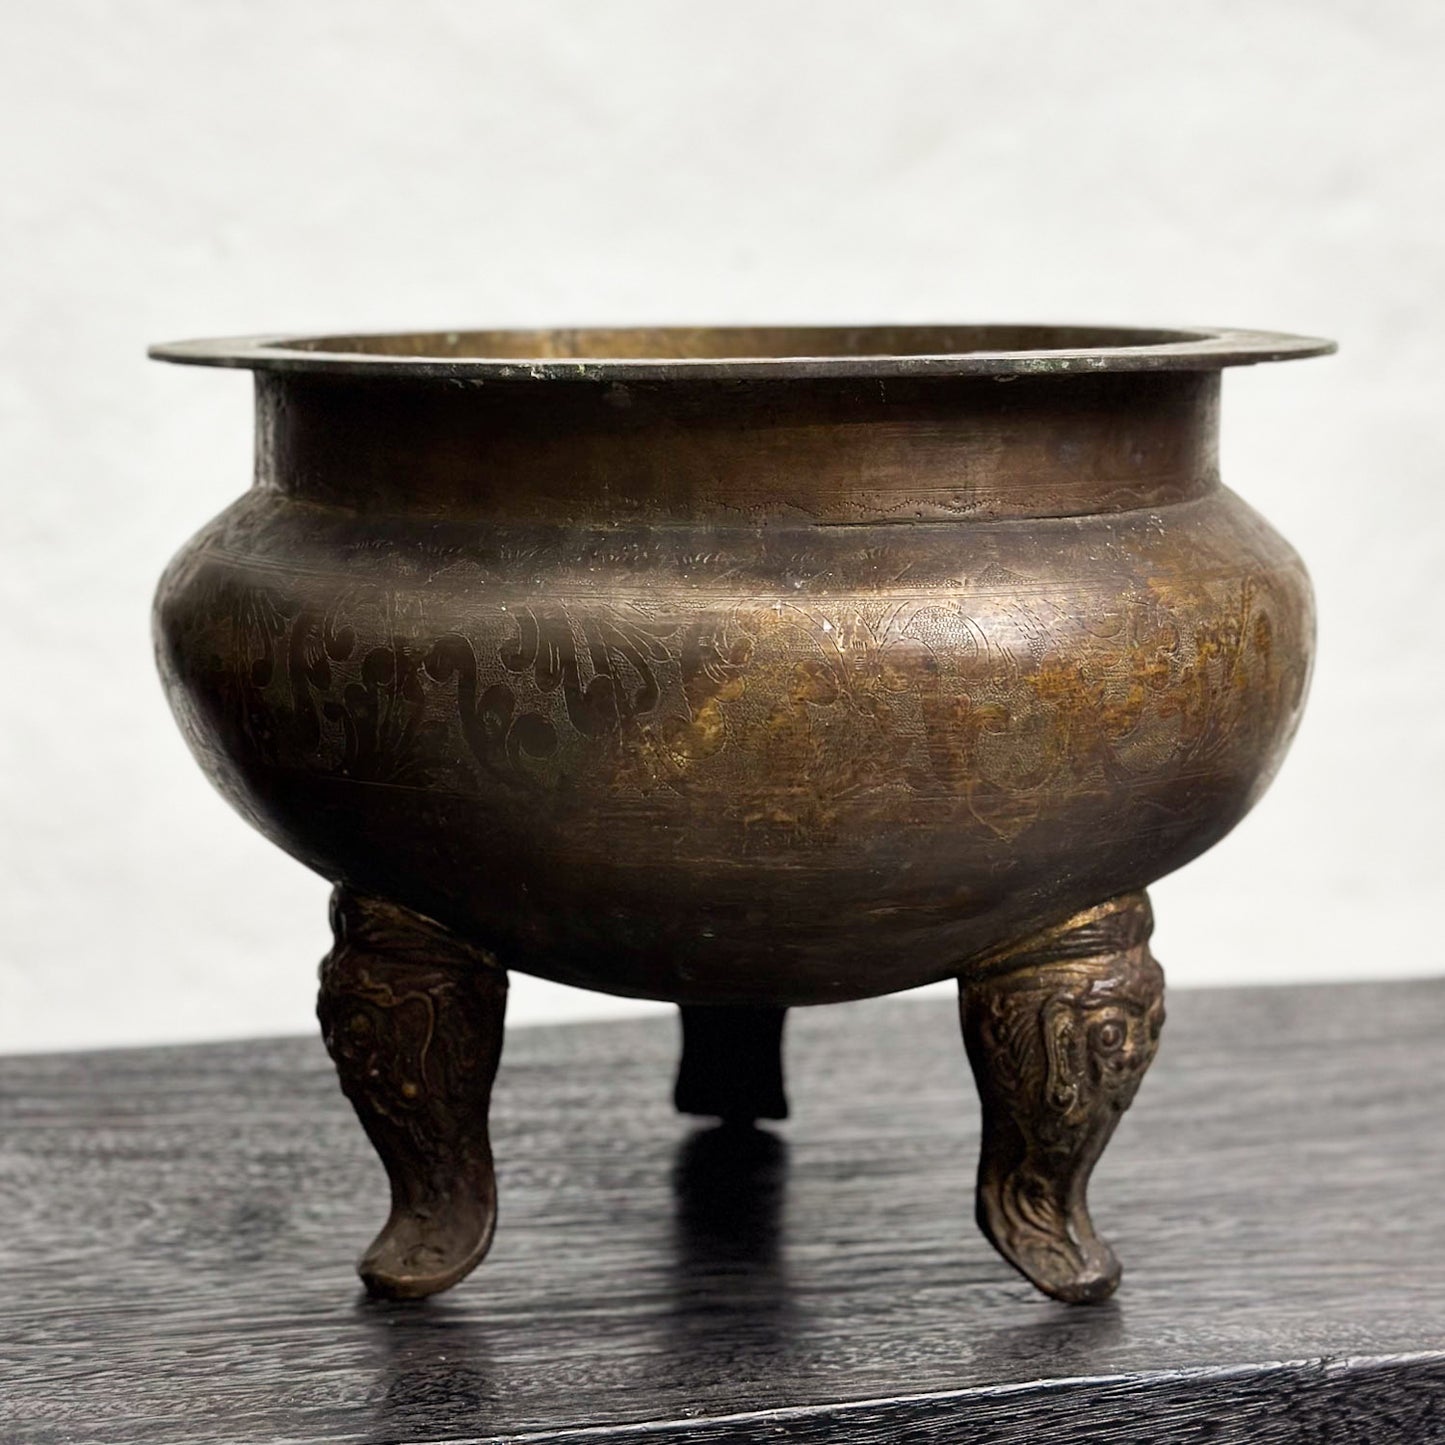 Vintage Embossed Claw Footed Bronze Bowl